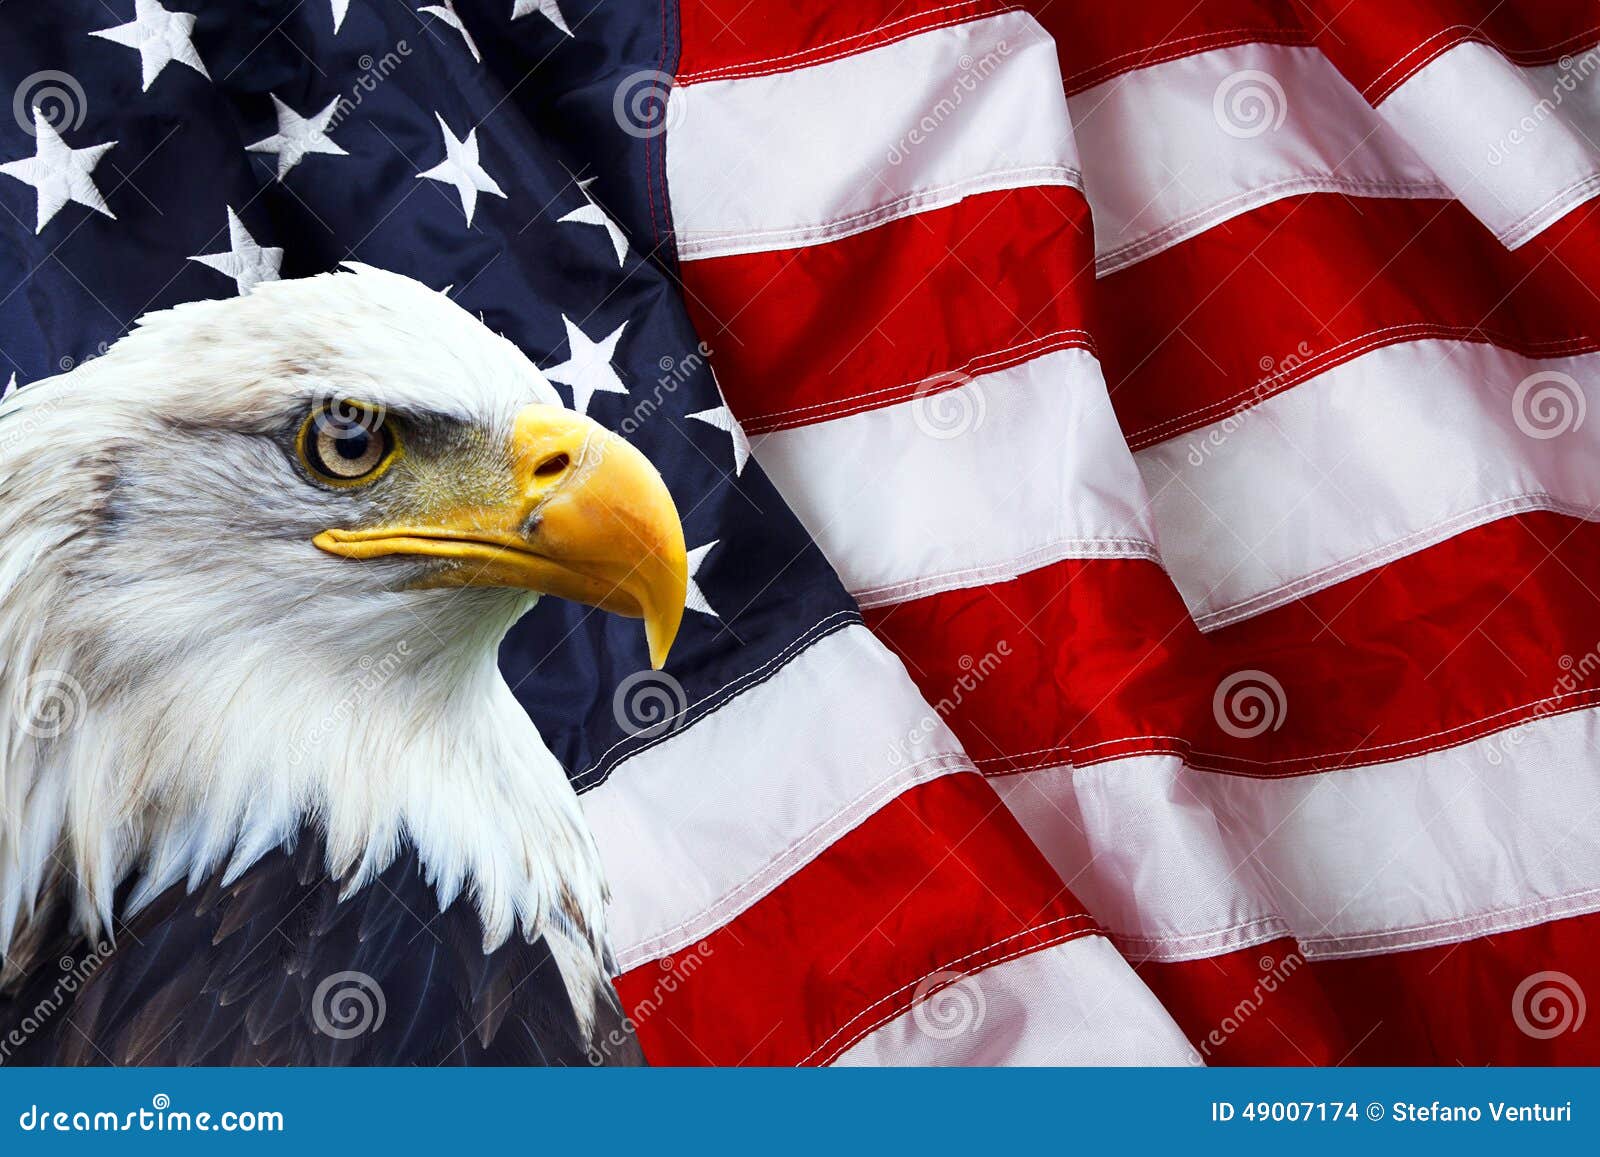 Image result for american flag images